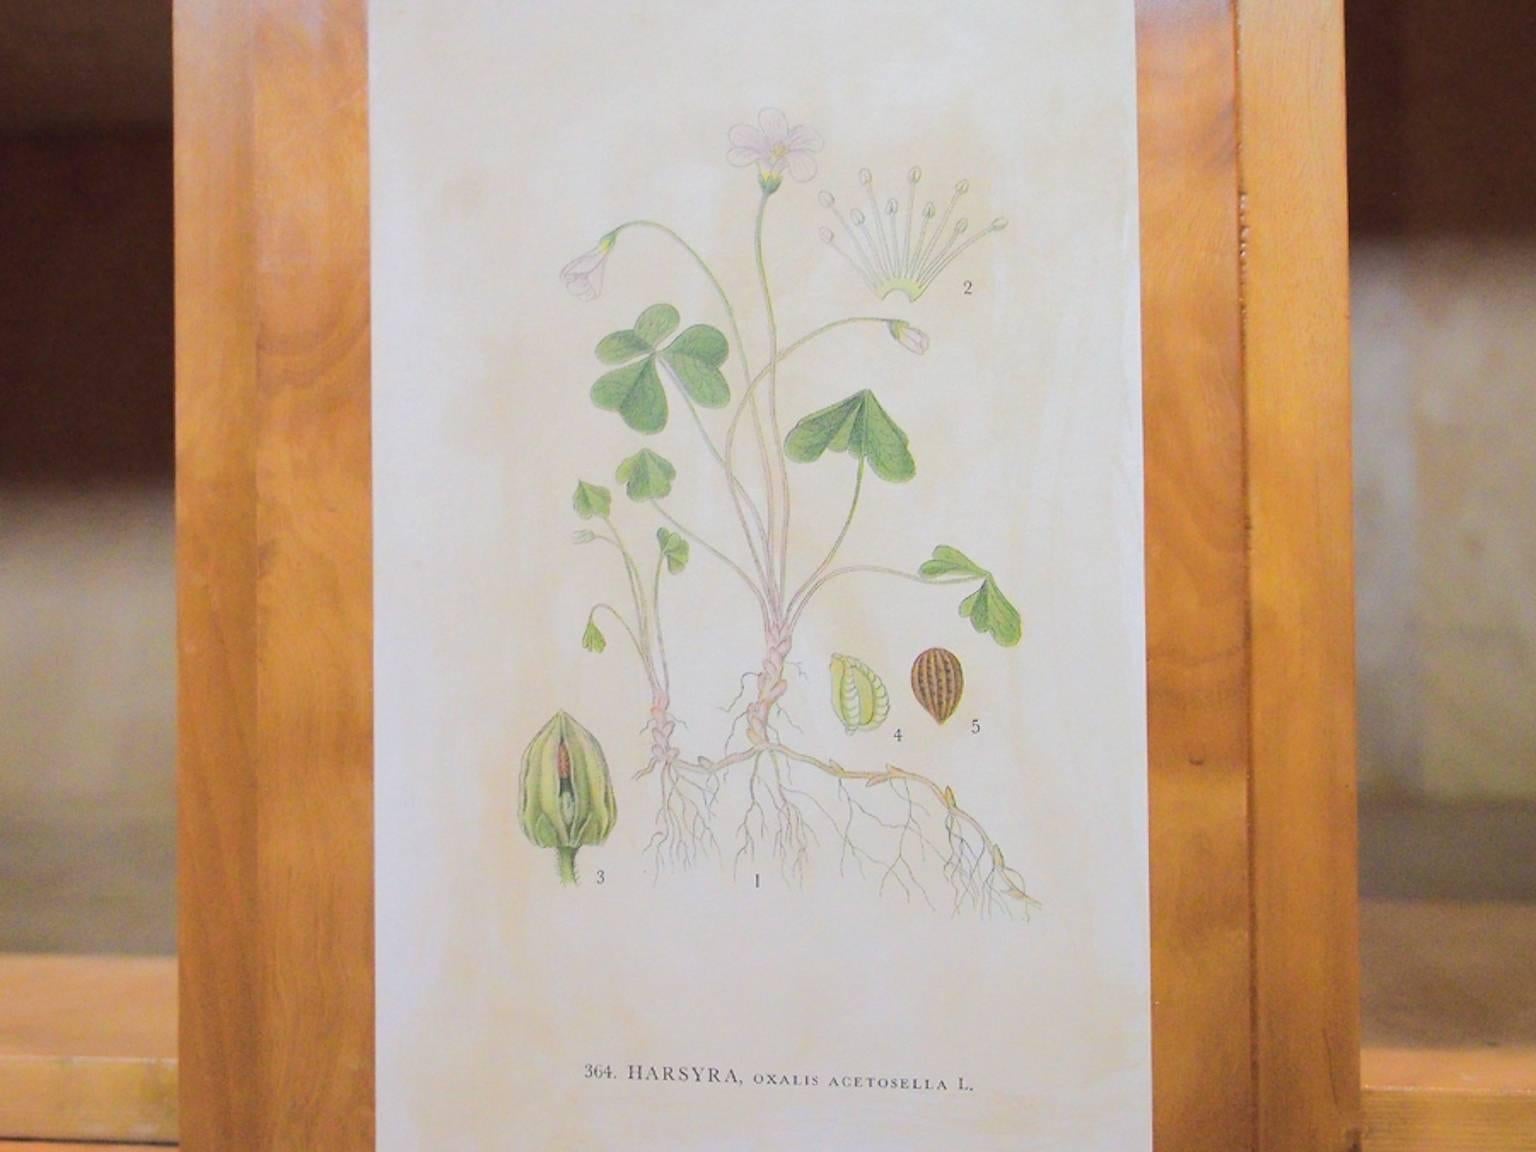 Swedish Wooden Cabinet with Nordern Flora Illustrations by C.A. Lindman 1